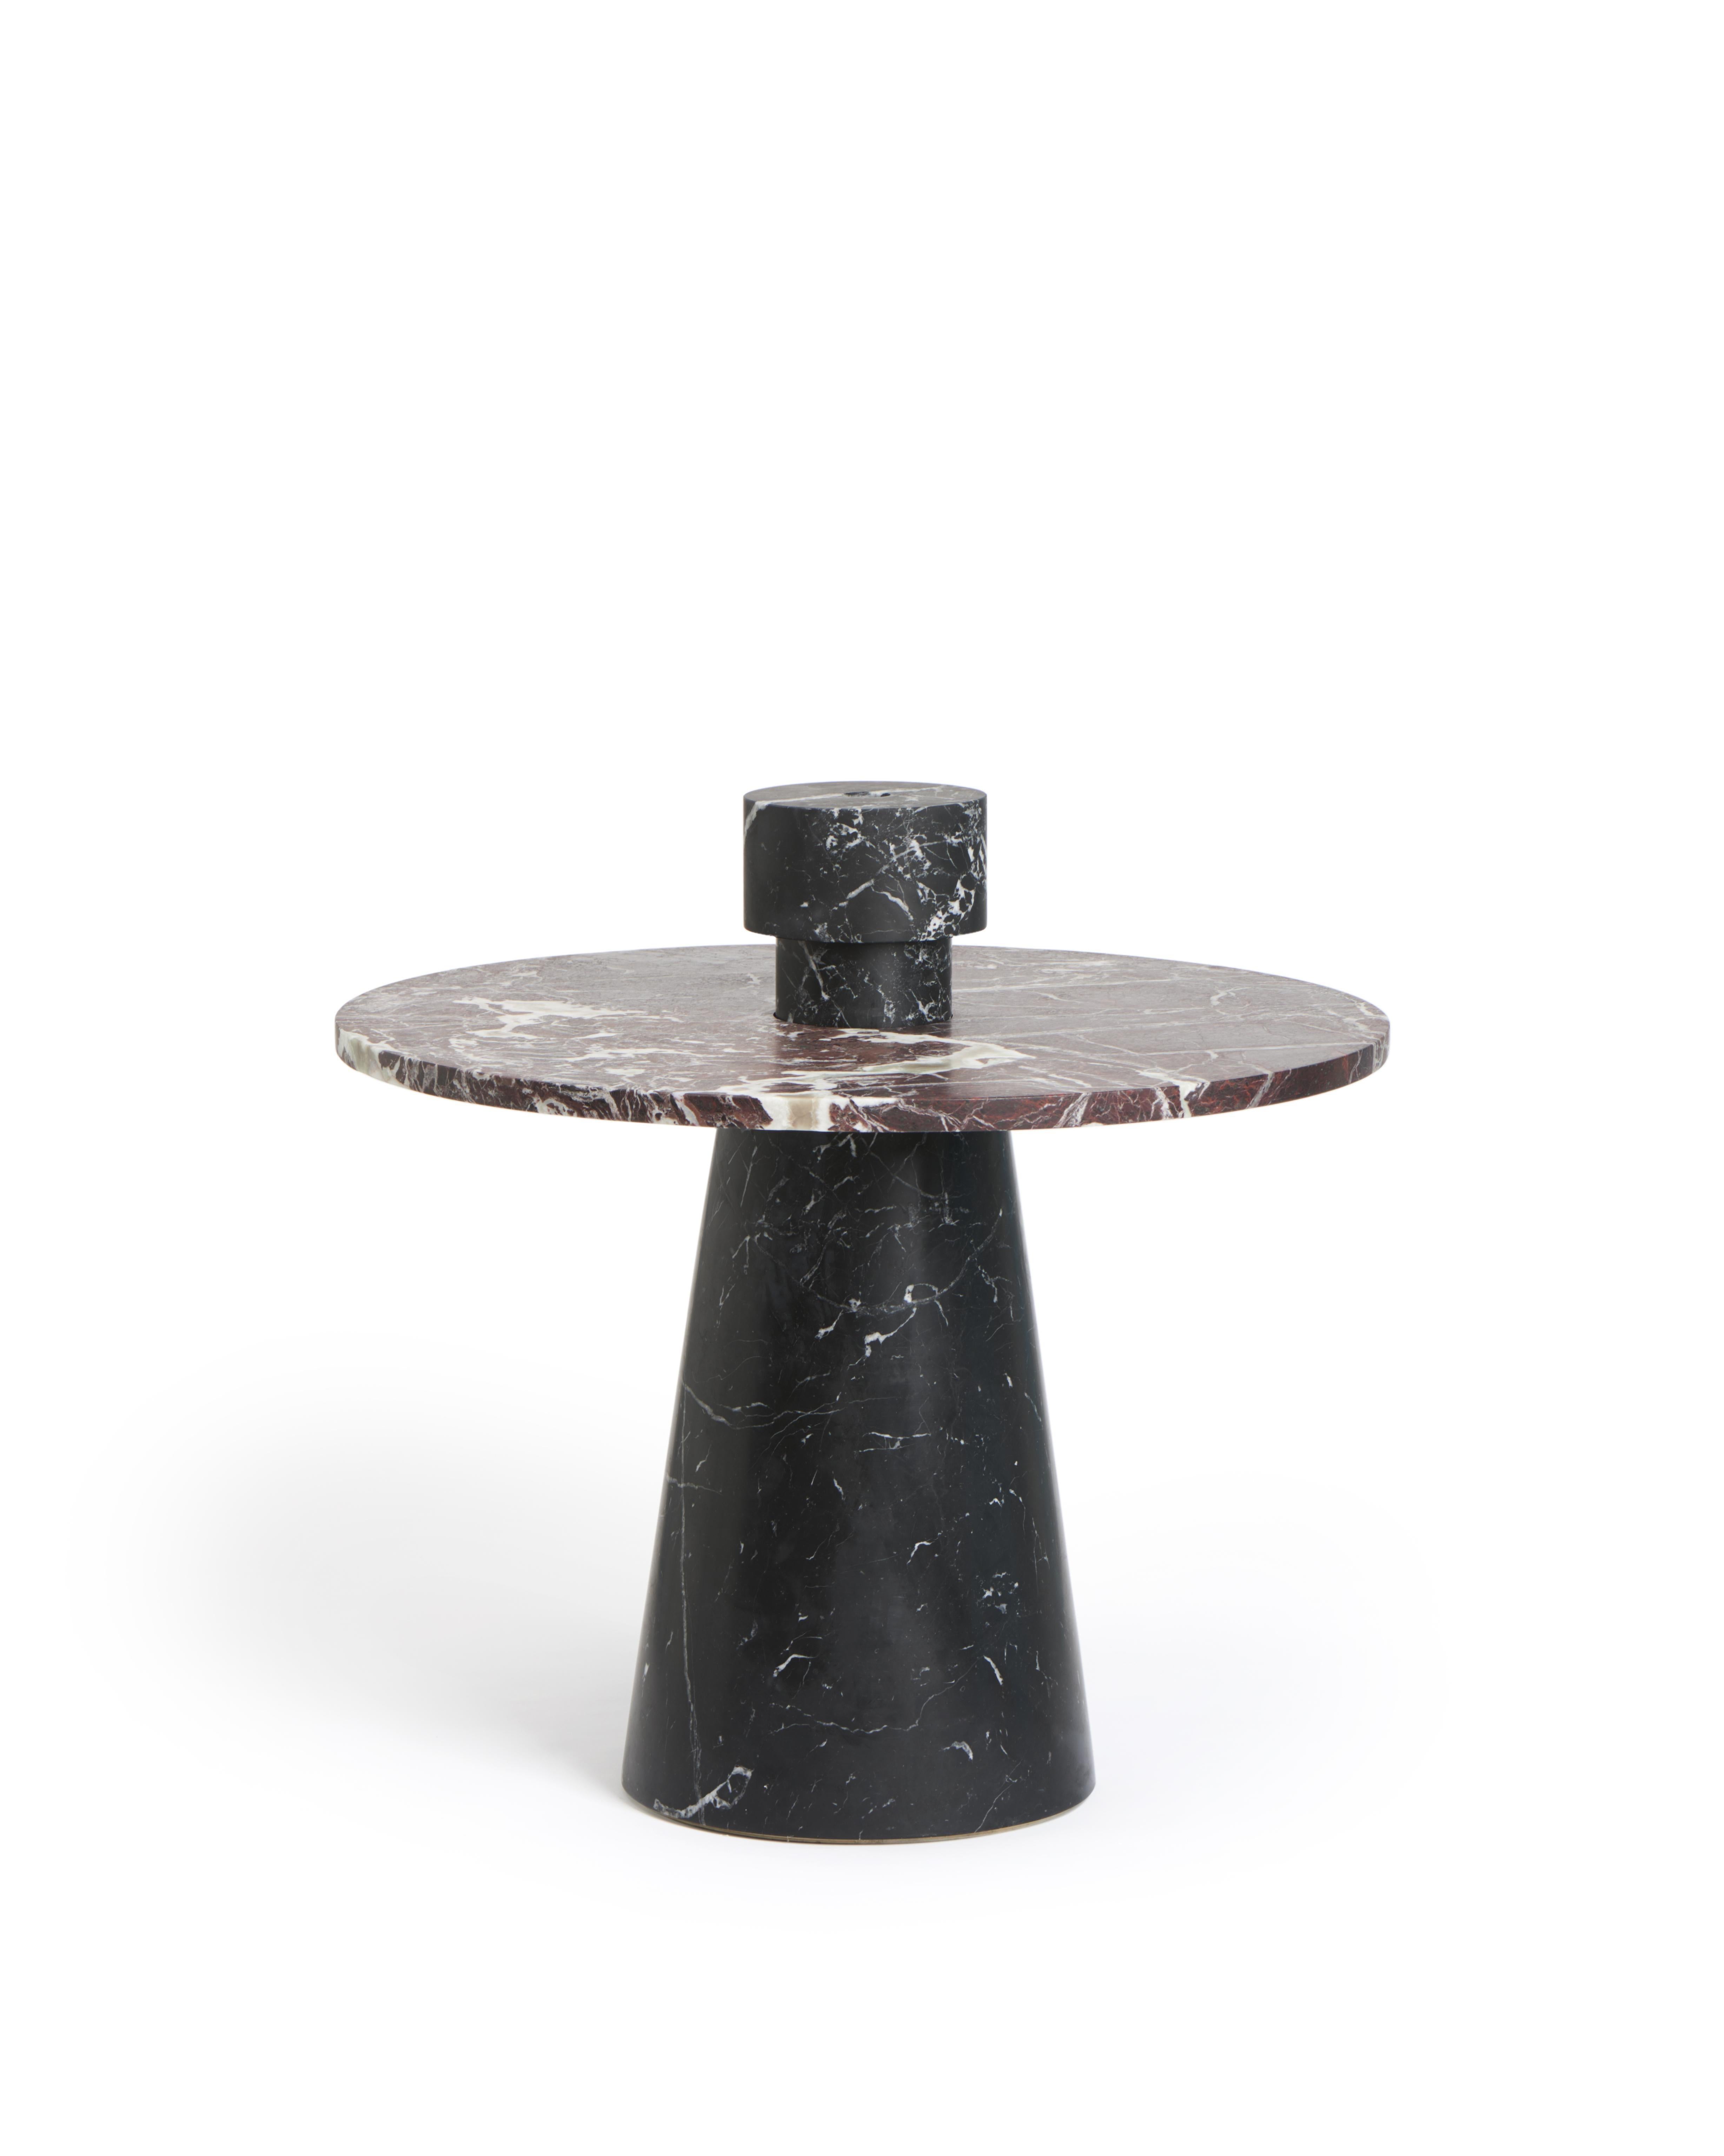 Candle Holder in Nero Marquinia marble, designed by the internationally renowned designer Karen Chekerdjian - it is available also in other colours.
It is part of the Inside Out Collection - tables and accessories (fruit bowls, candles holder, and